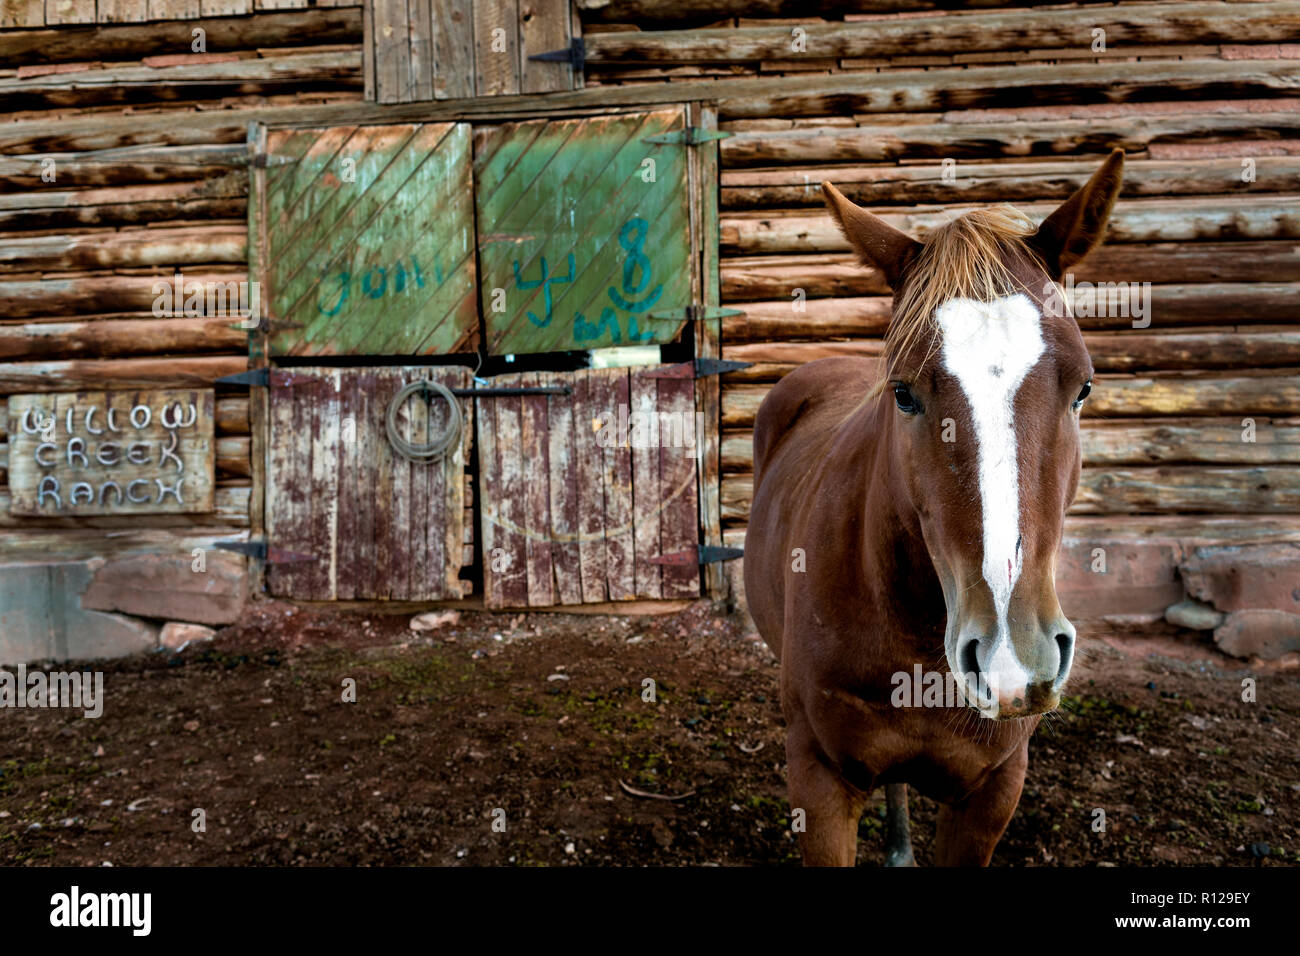 WY02439-00...WYOMING - Horse in the corral on the Willow Creek Ranch.log barn Stock Photo